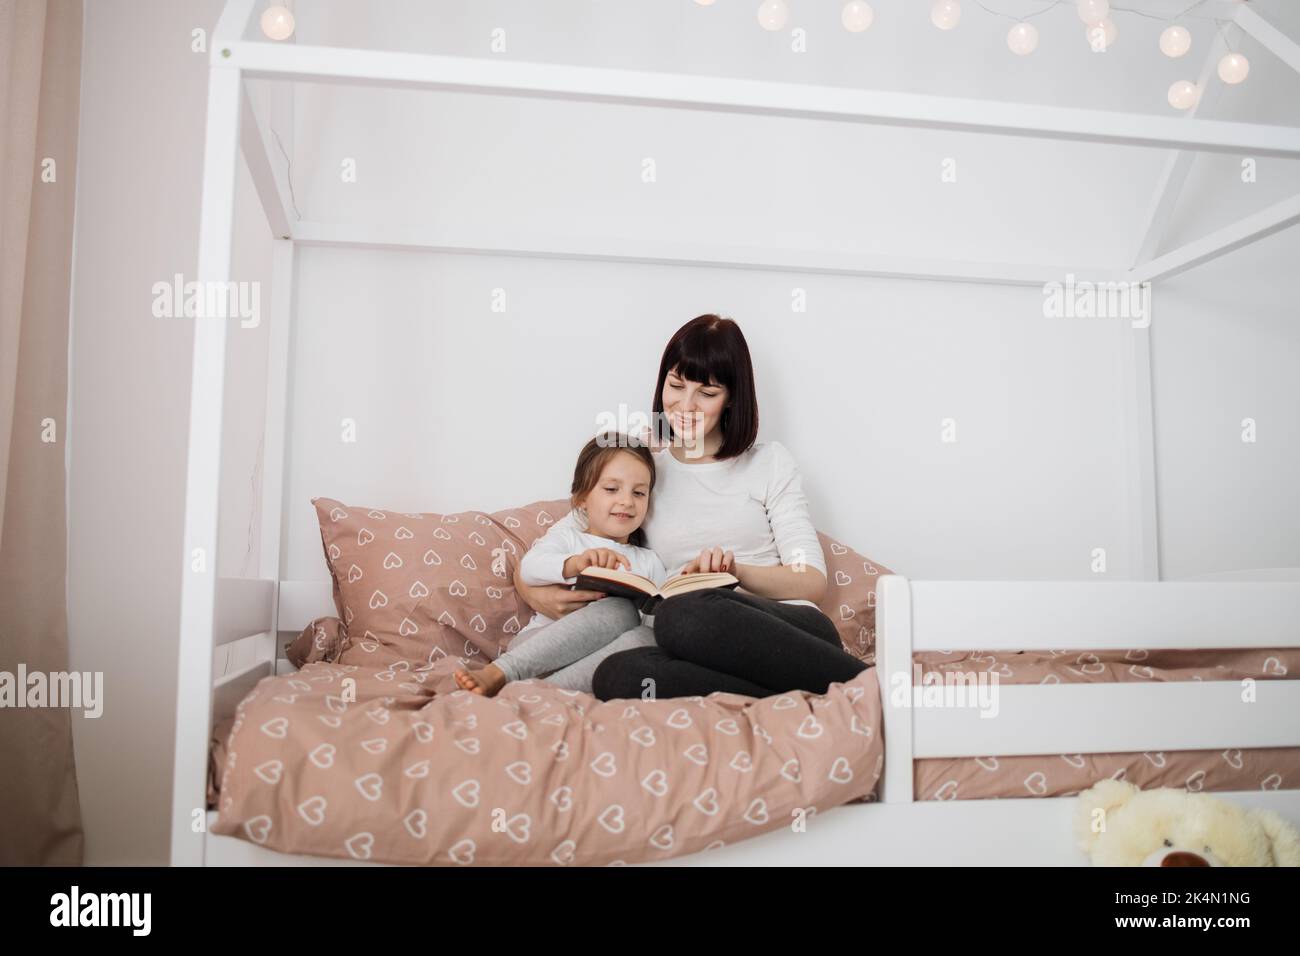 Portrait of cheerful caucasian preschooler girl and her young lady mother reading funny interesting children book together while sitting on bed in bedroom interior. Stock Photo